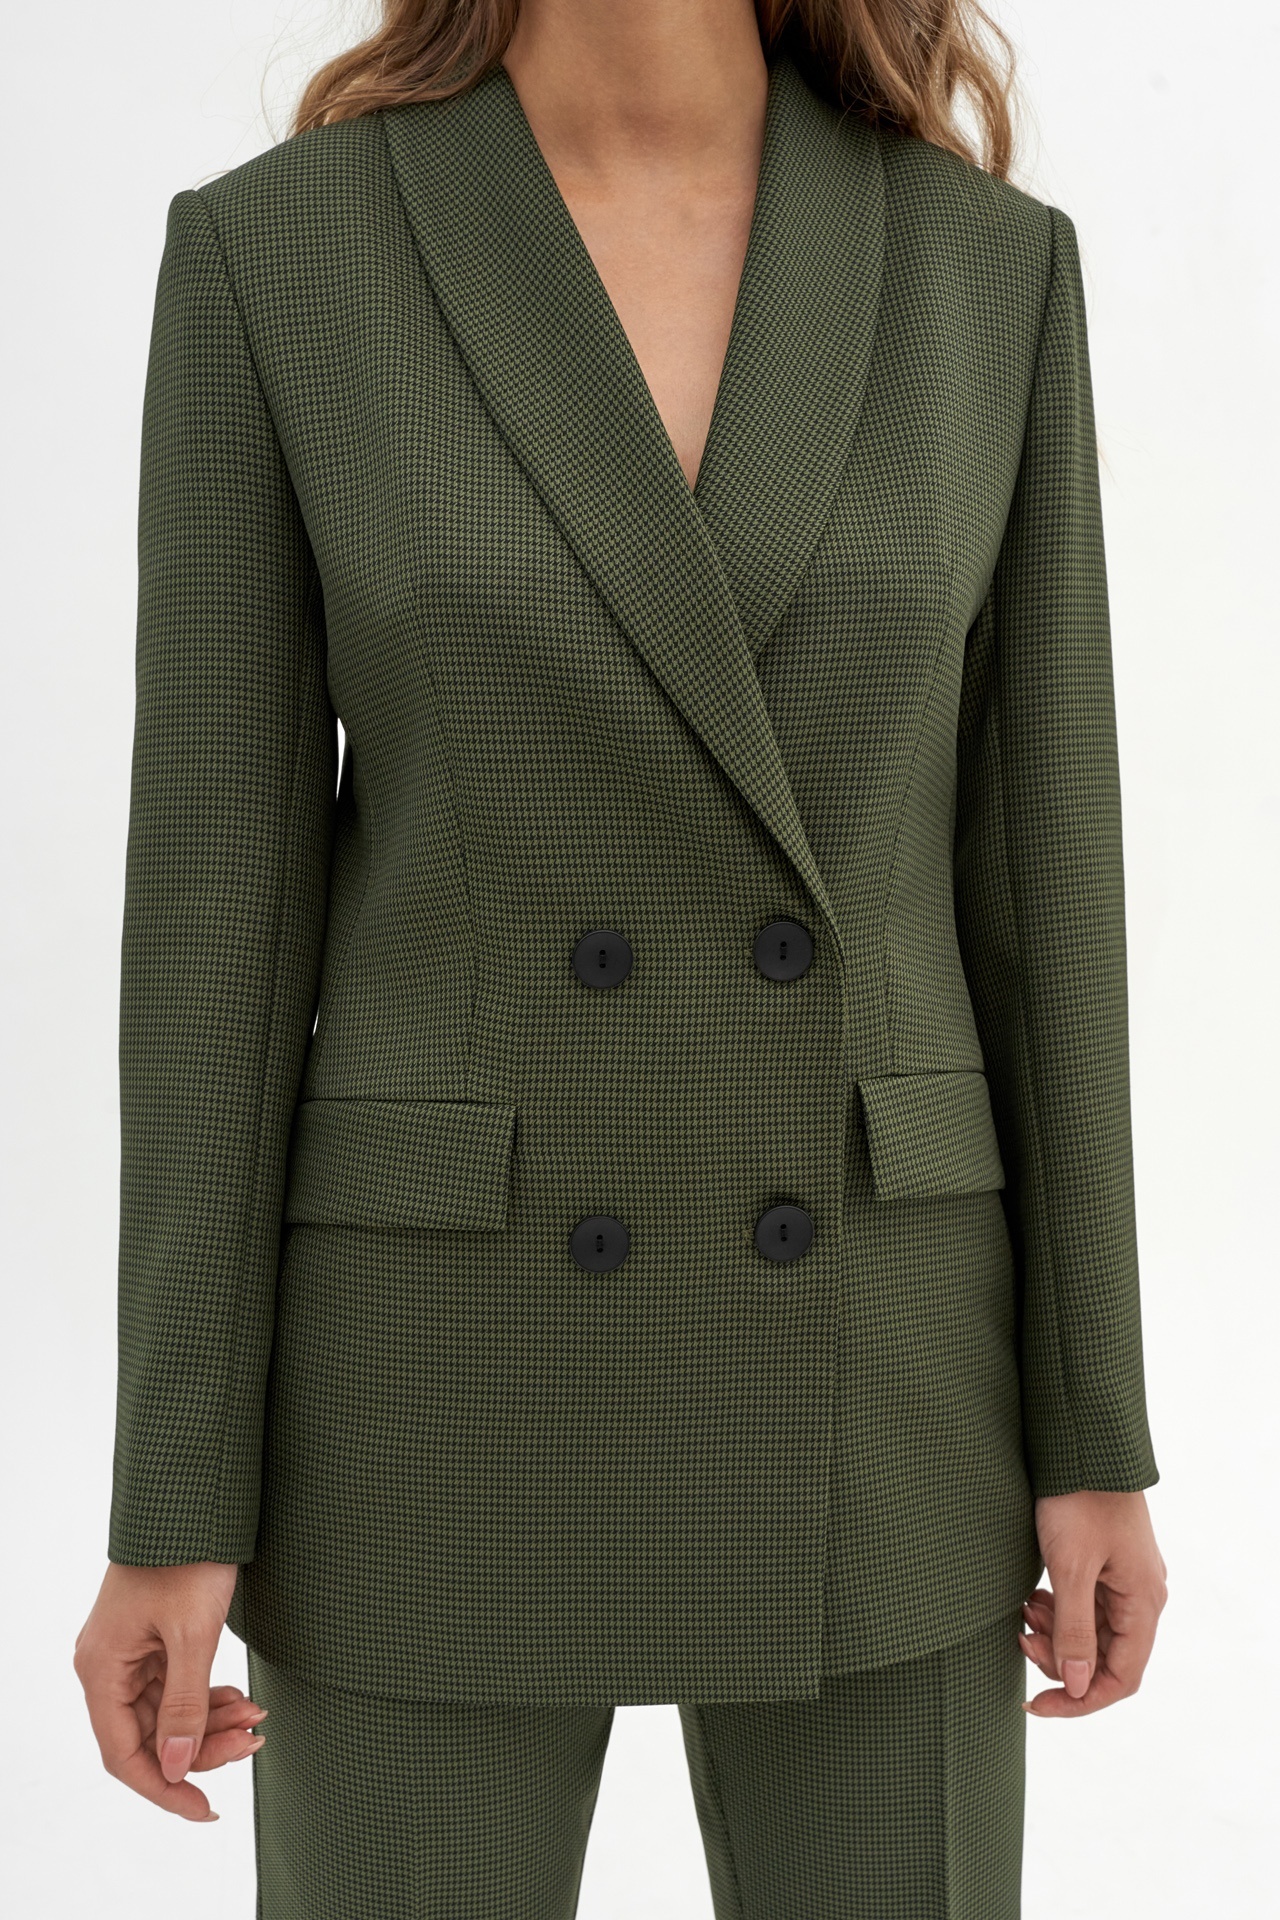 Jacket with houndstooth print in dark green color